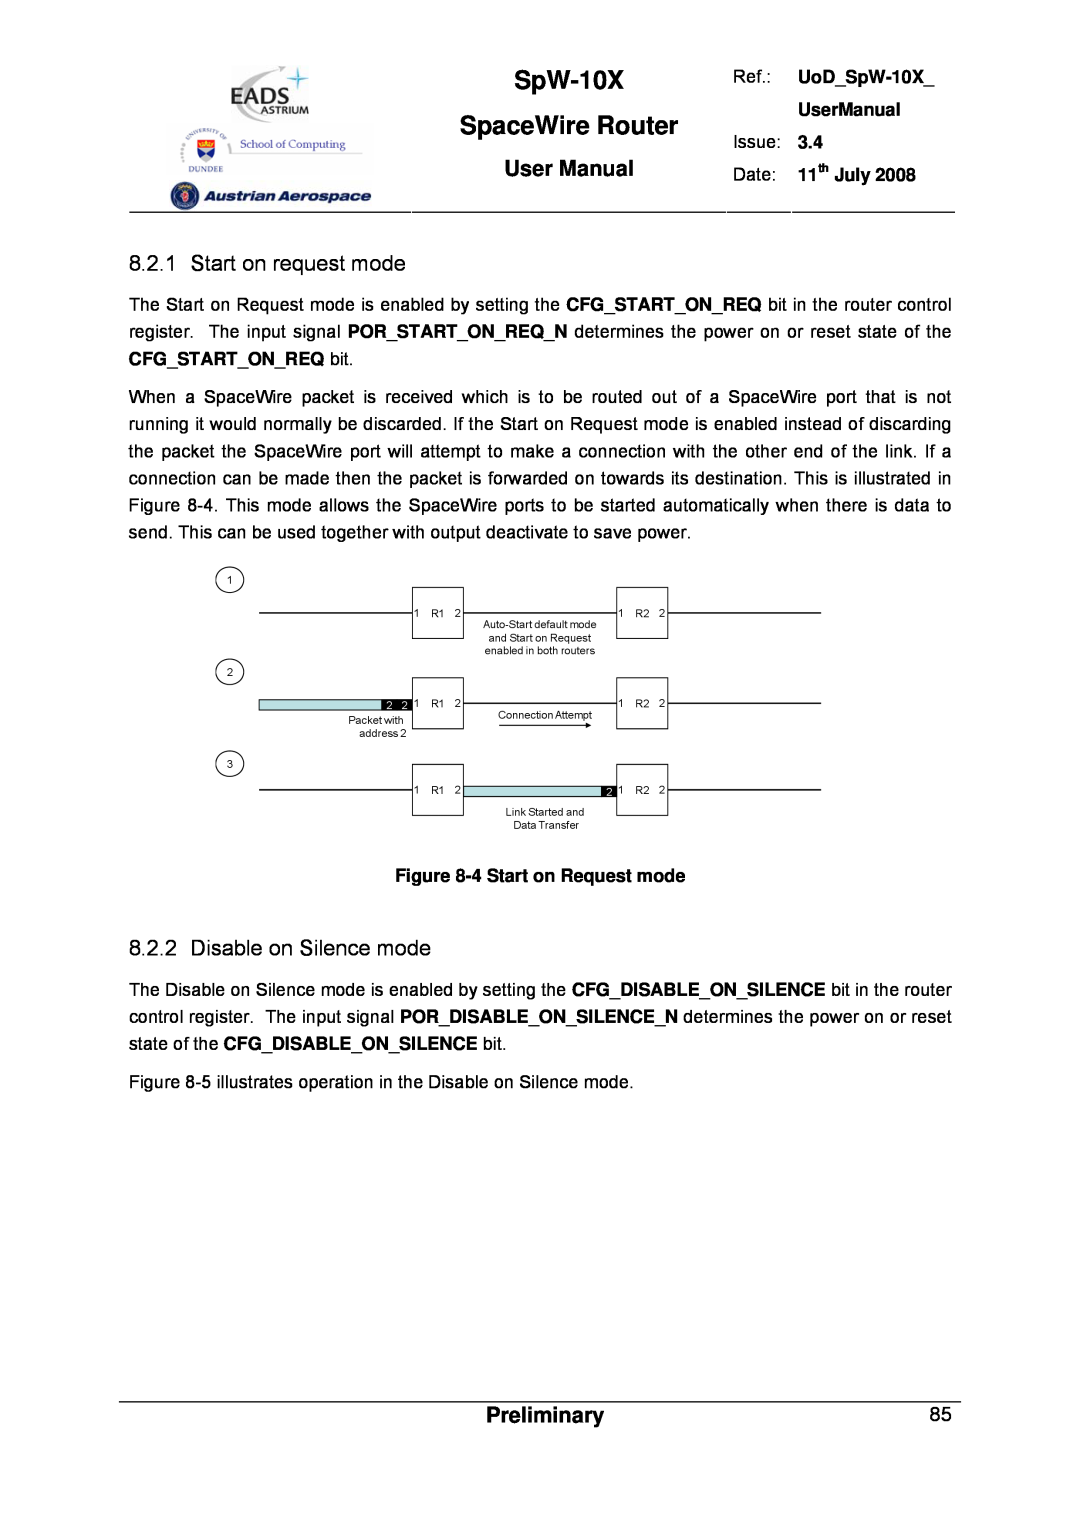 Atmel SpW-10X user manual Start on request mode, Disable on Silence mode, SpaceWire Router, User Manual, Preliminary 